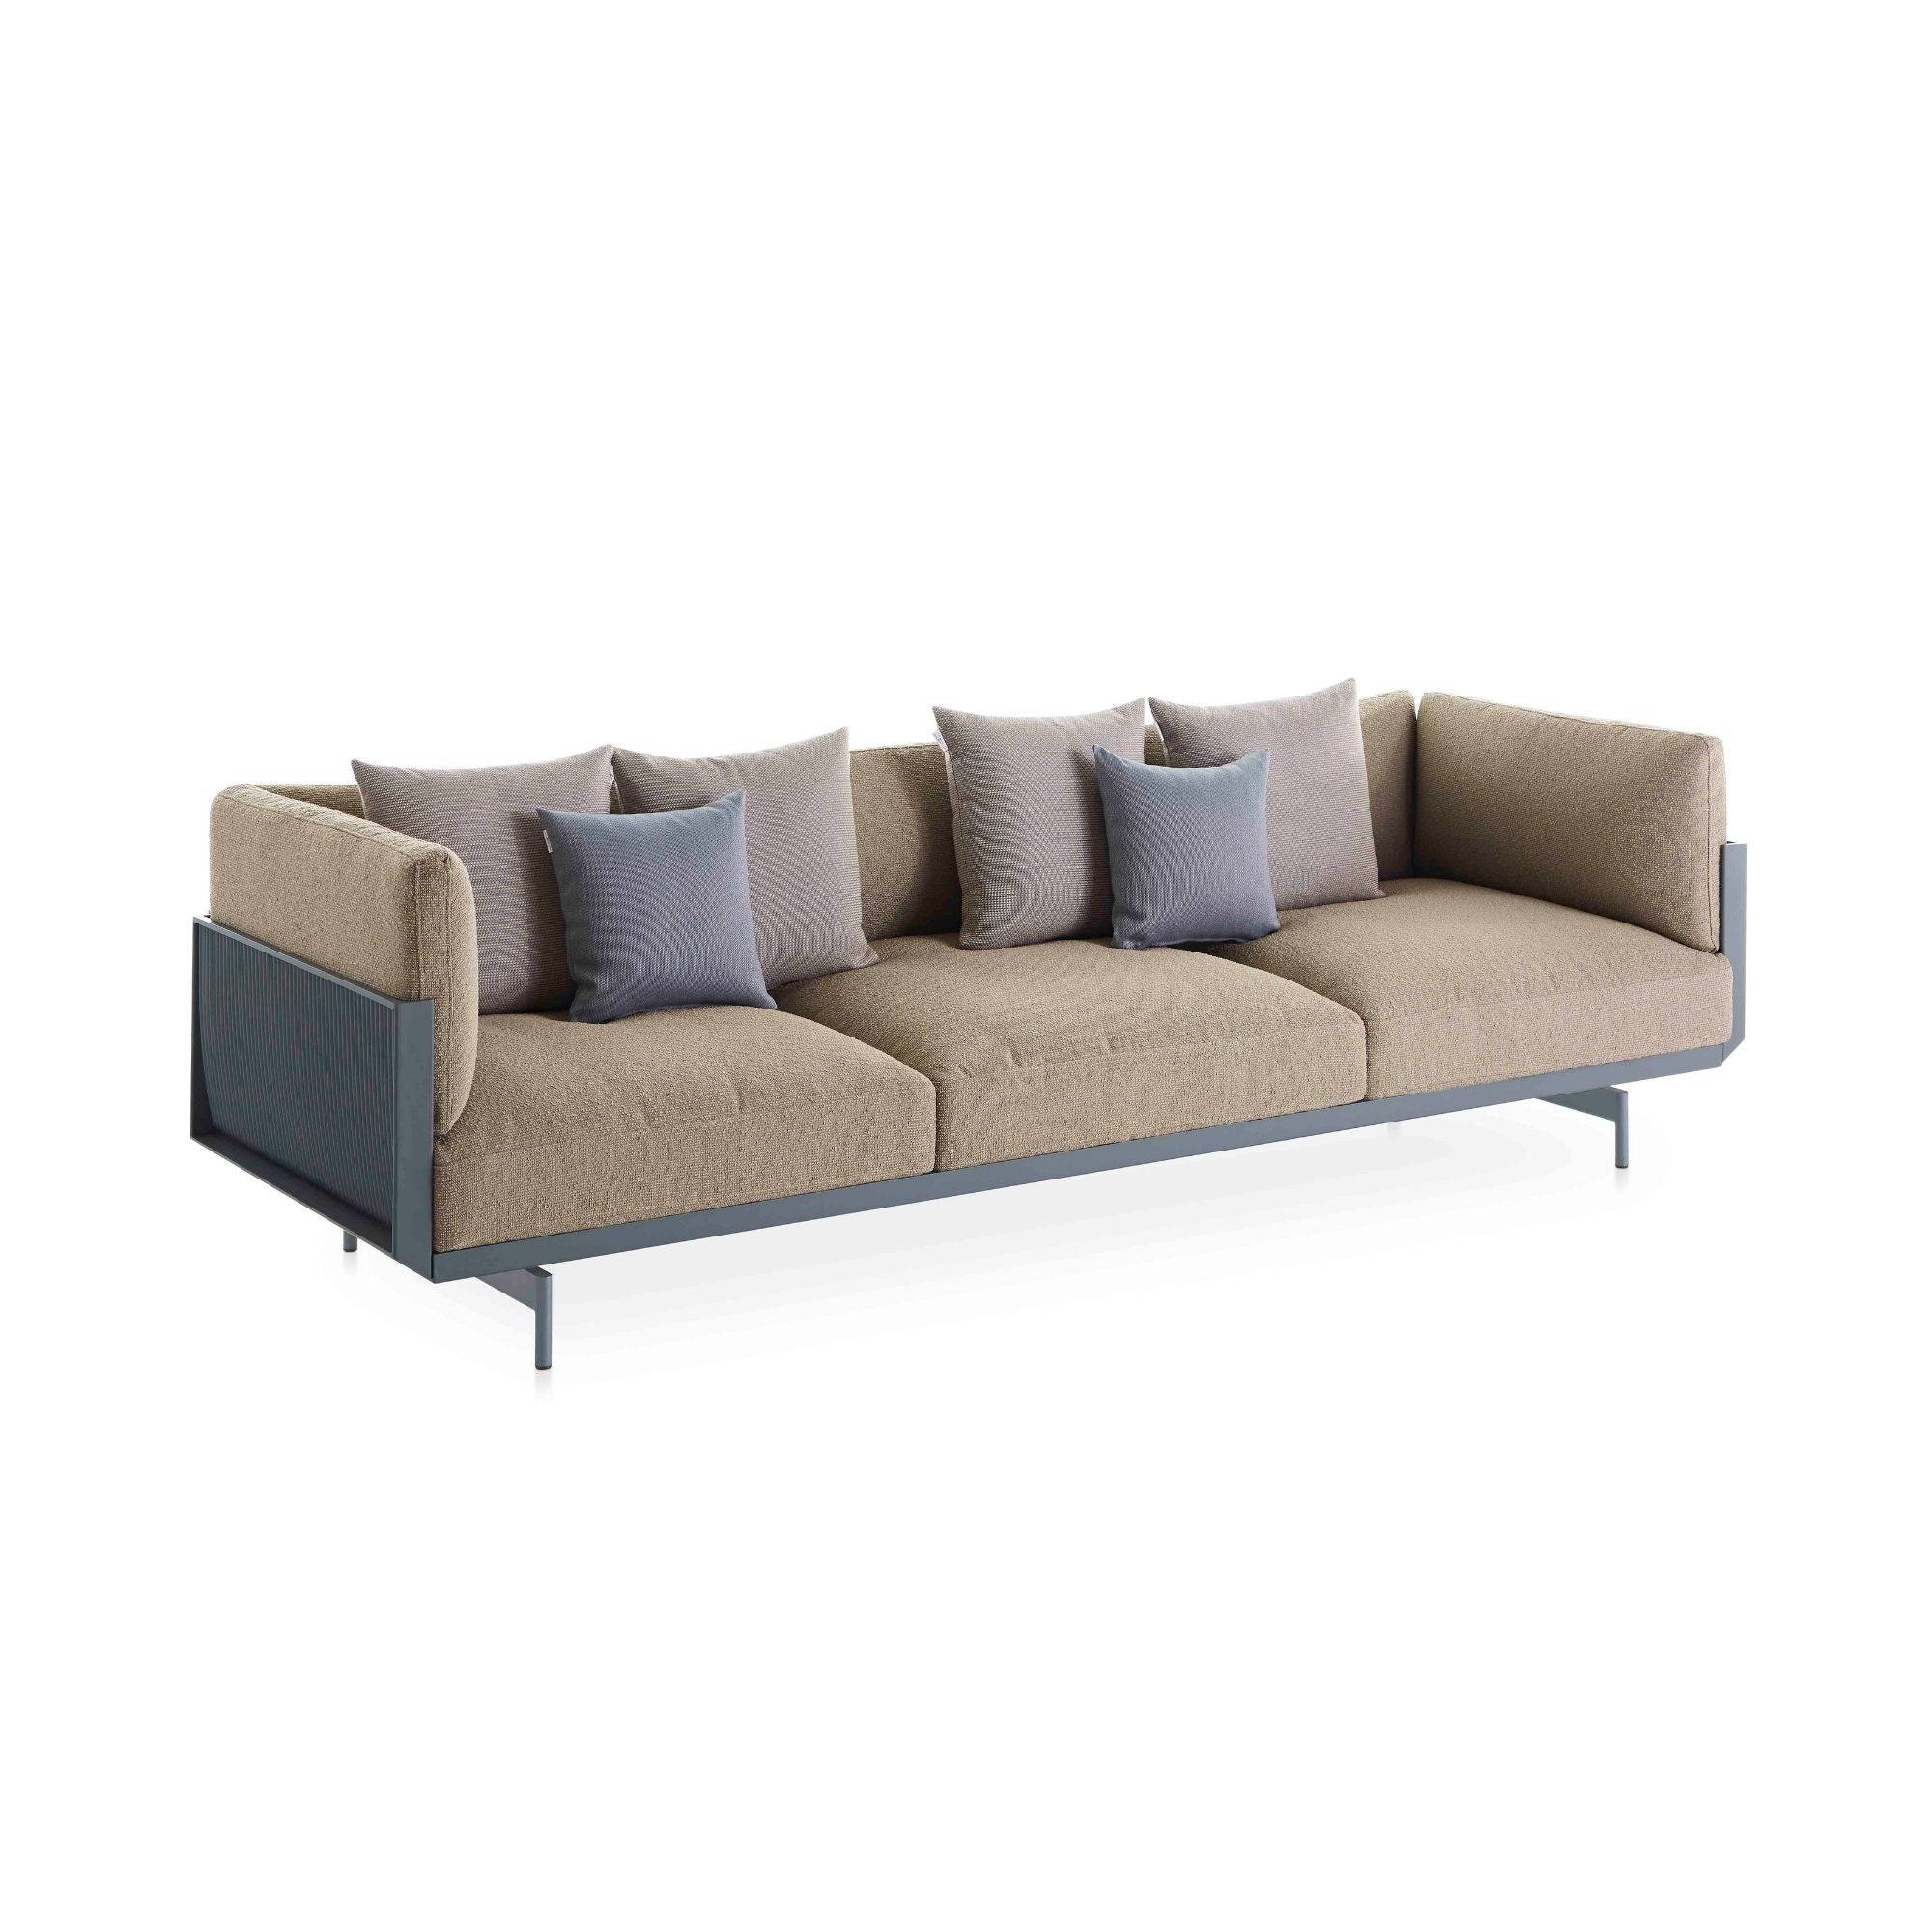 Onde 3-seater Sofa - THAT COOL LIVING